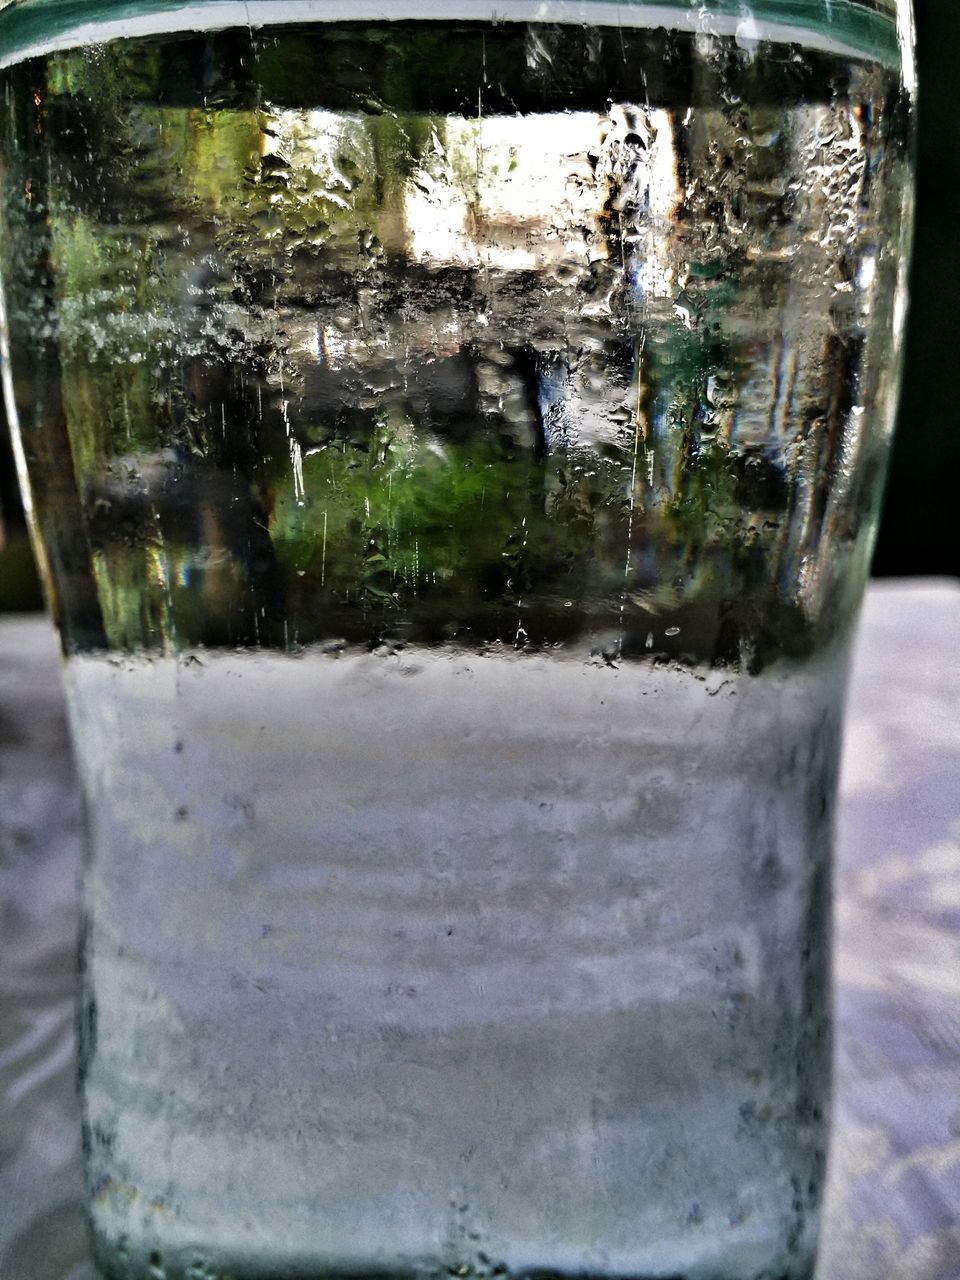 glass - material, transparent, drinking glass, drink, refreshment, indoors, freshness, glass, close-up, food and drink, water, cold temperature, window, ice, table, drop, condensation, reflection, focus on foreground, alcohol